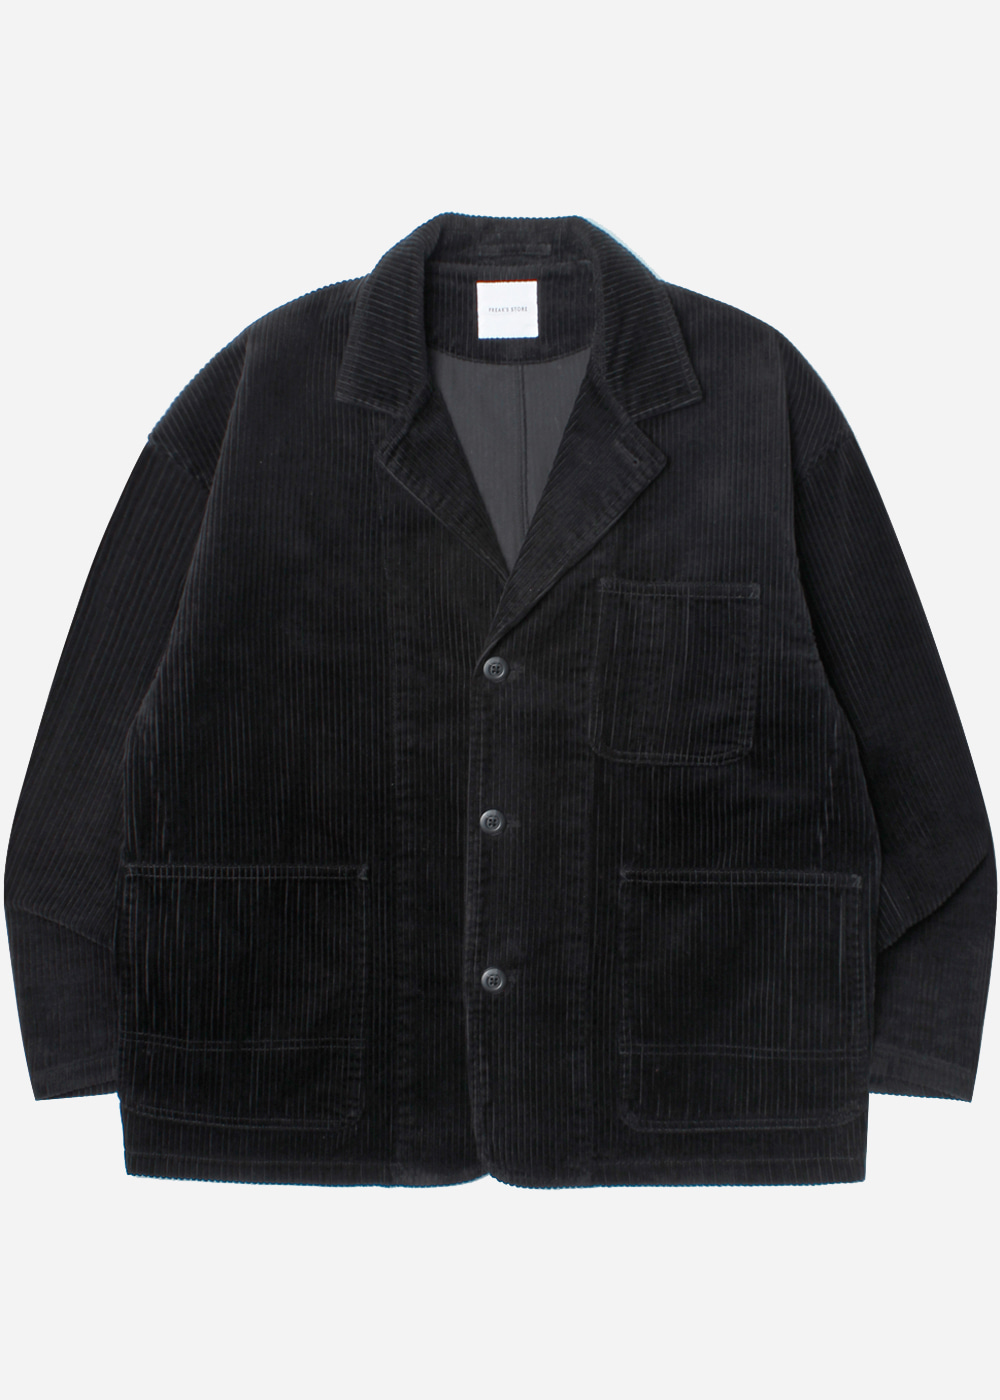 FREAK’S STORE’over fit’corduroy 3 button work jacket